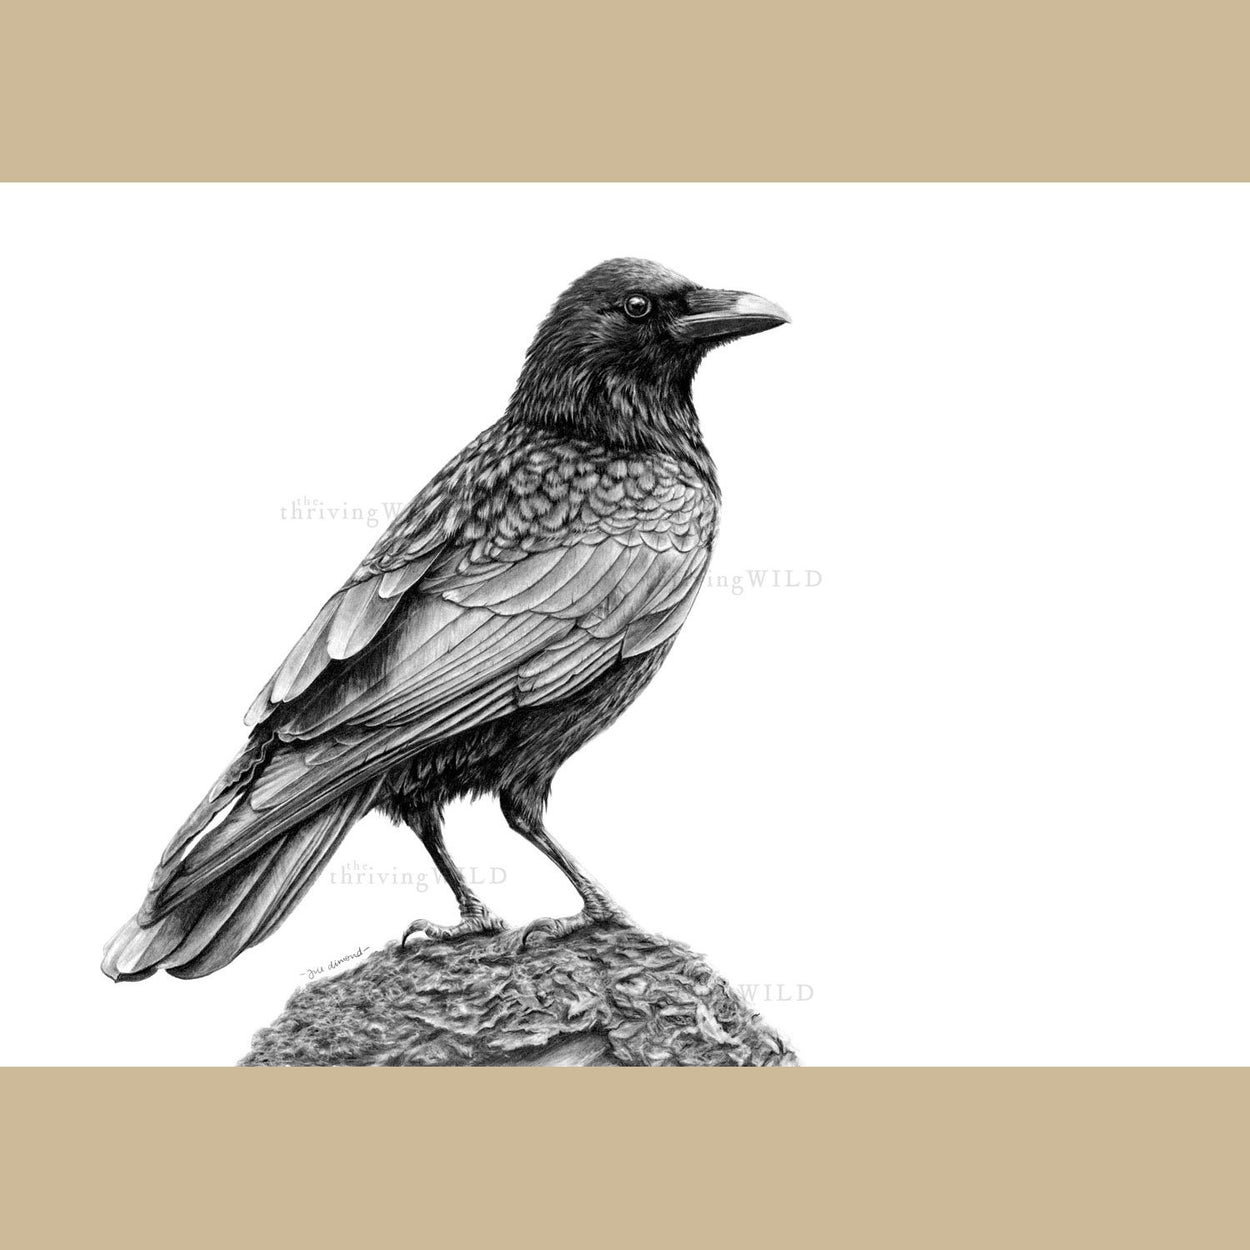 Crow Pencil Drawing - The Thriving Wild Jill Dimond